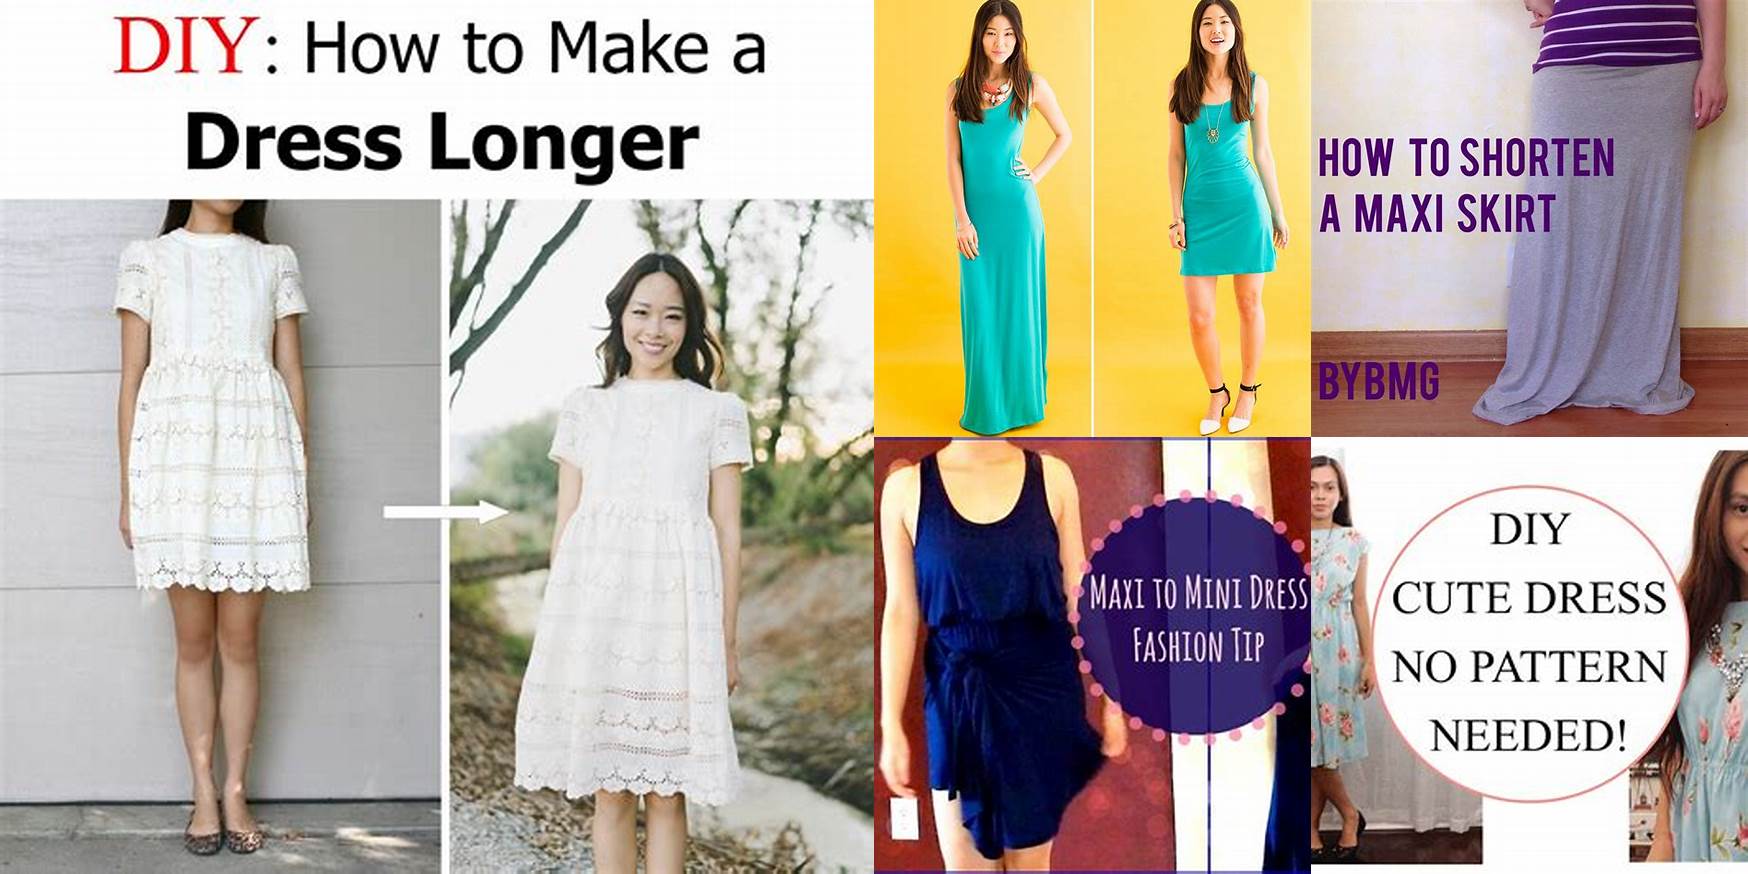 How To Make A Short Dress Longer Without Sewing